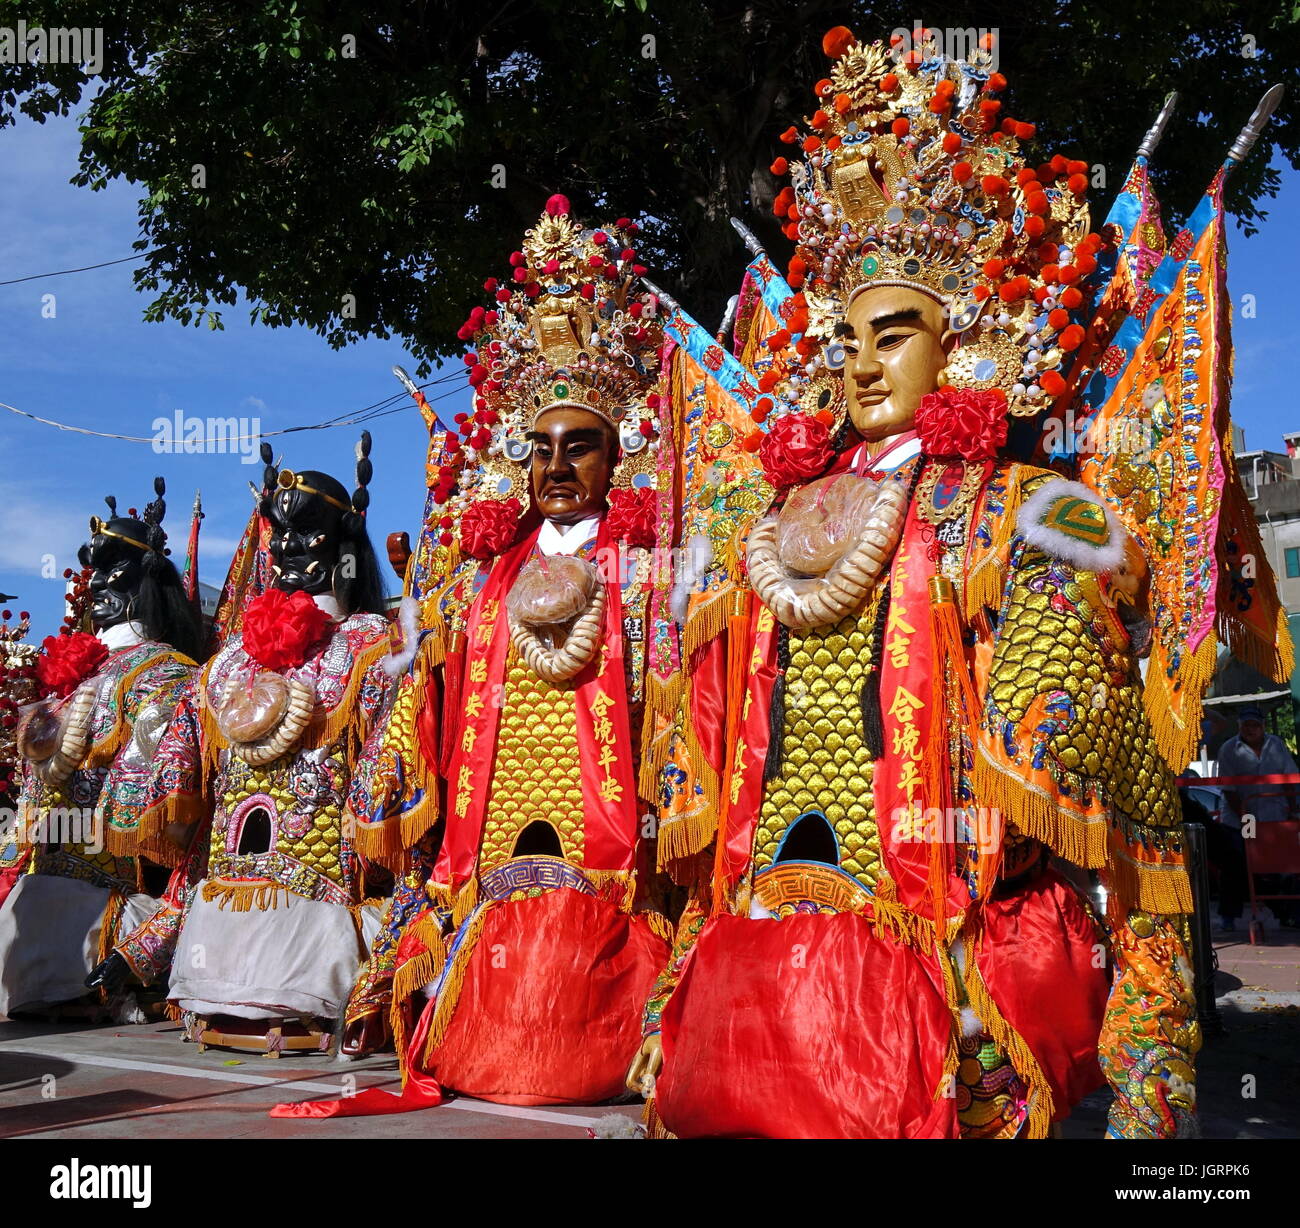 KAOHSIUNG, TAIWAN -- JUNE 10 , 2017: A set of large elaborate masks and costumes worn by dancers to represent deities popular in Taiwan's folk religio Stock Photo